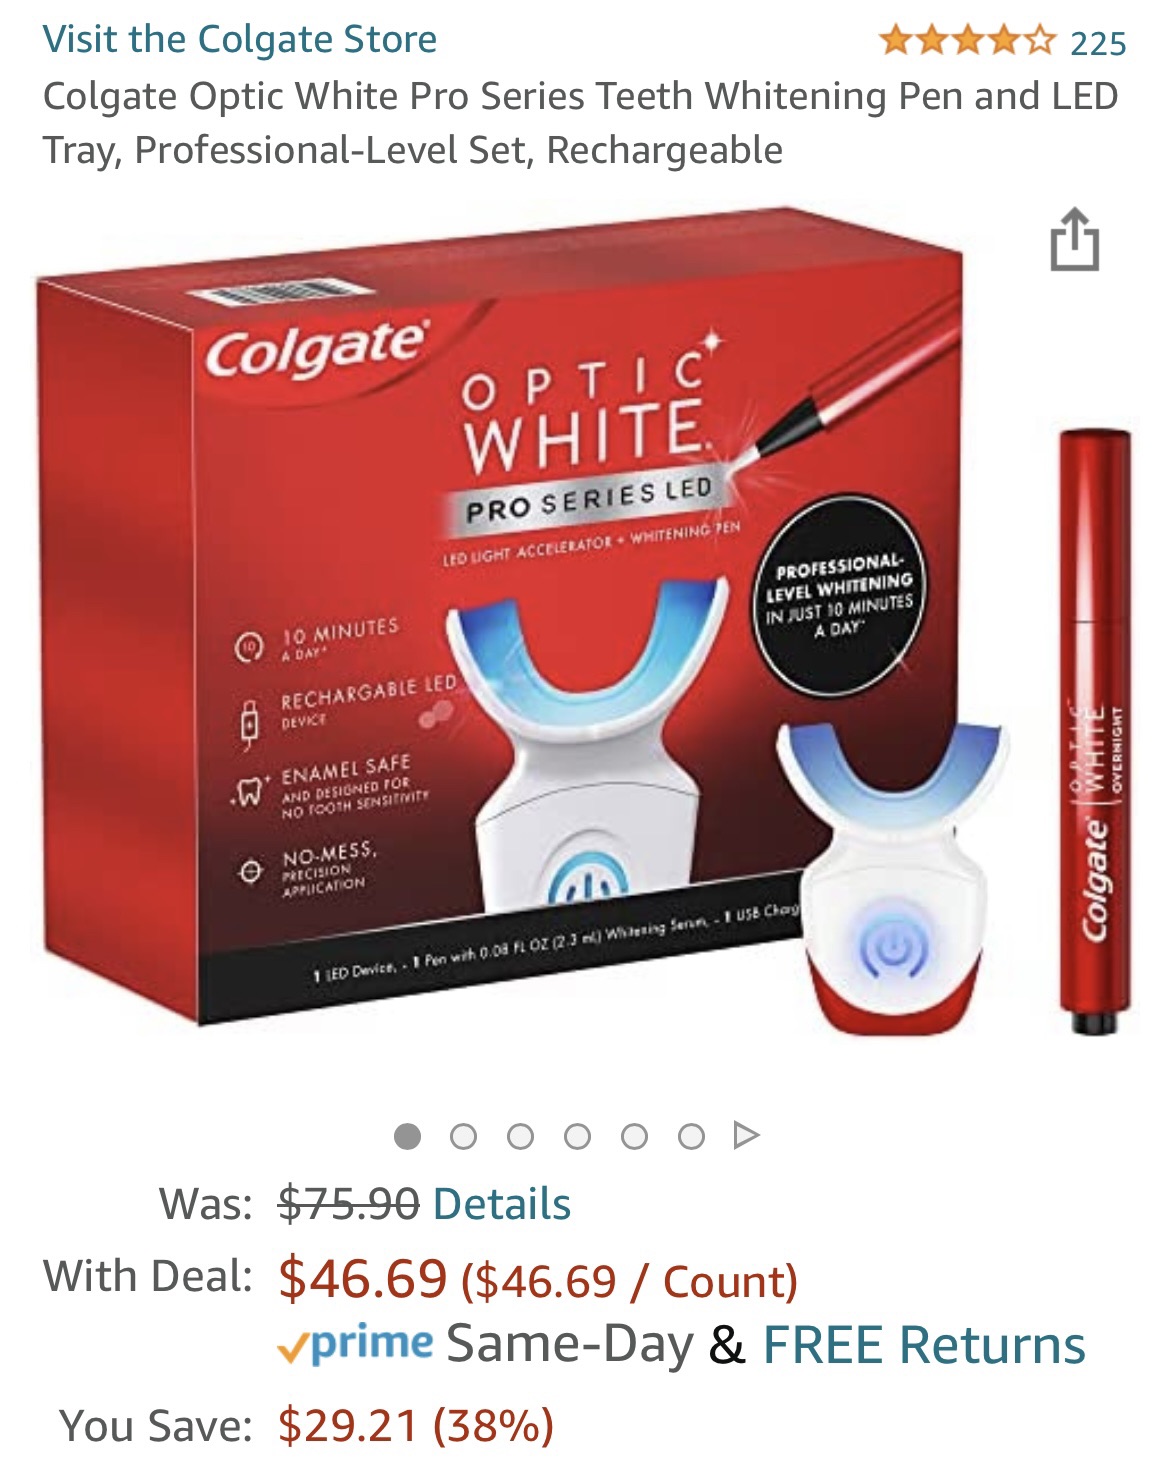 Colgate Optic White Pro Series Teeth Whitening Pen and LED Tray